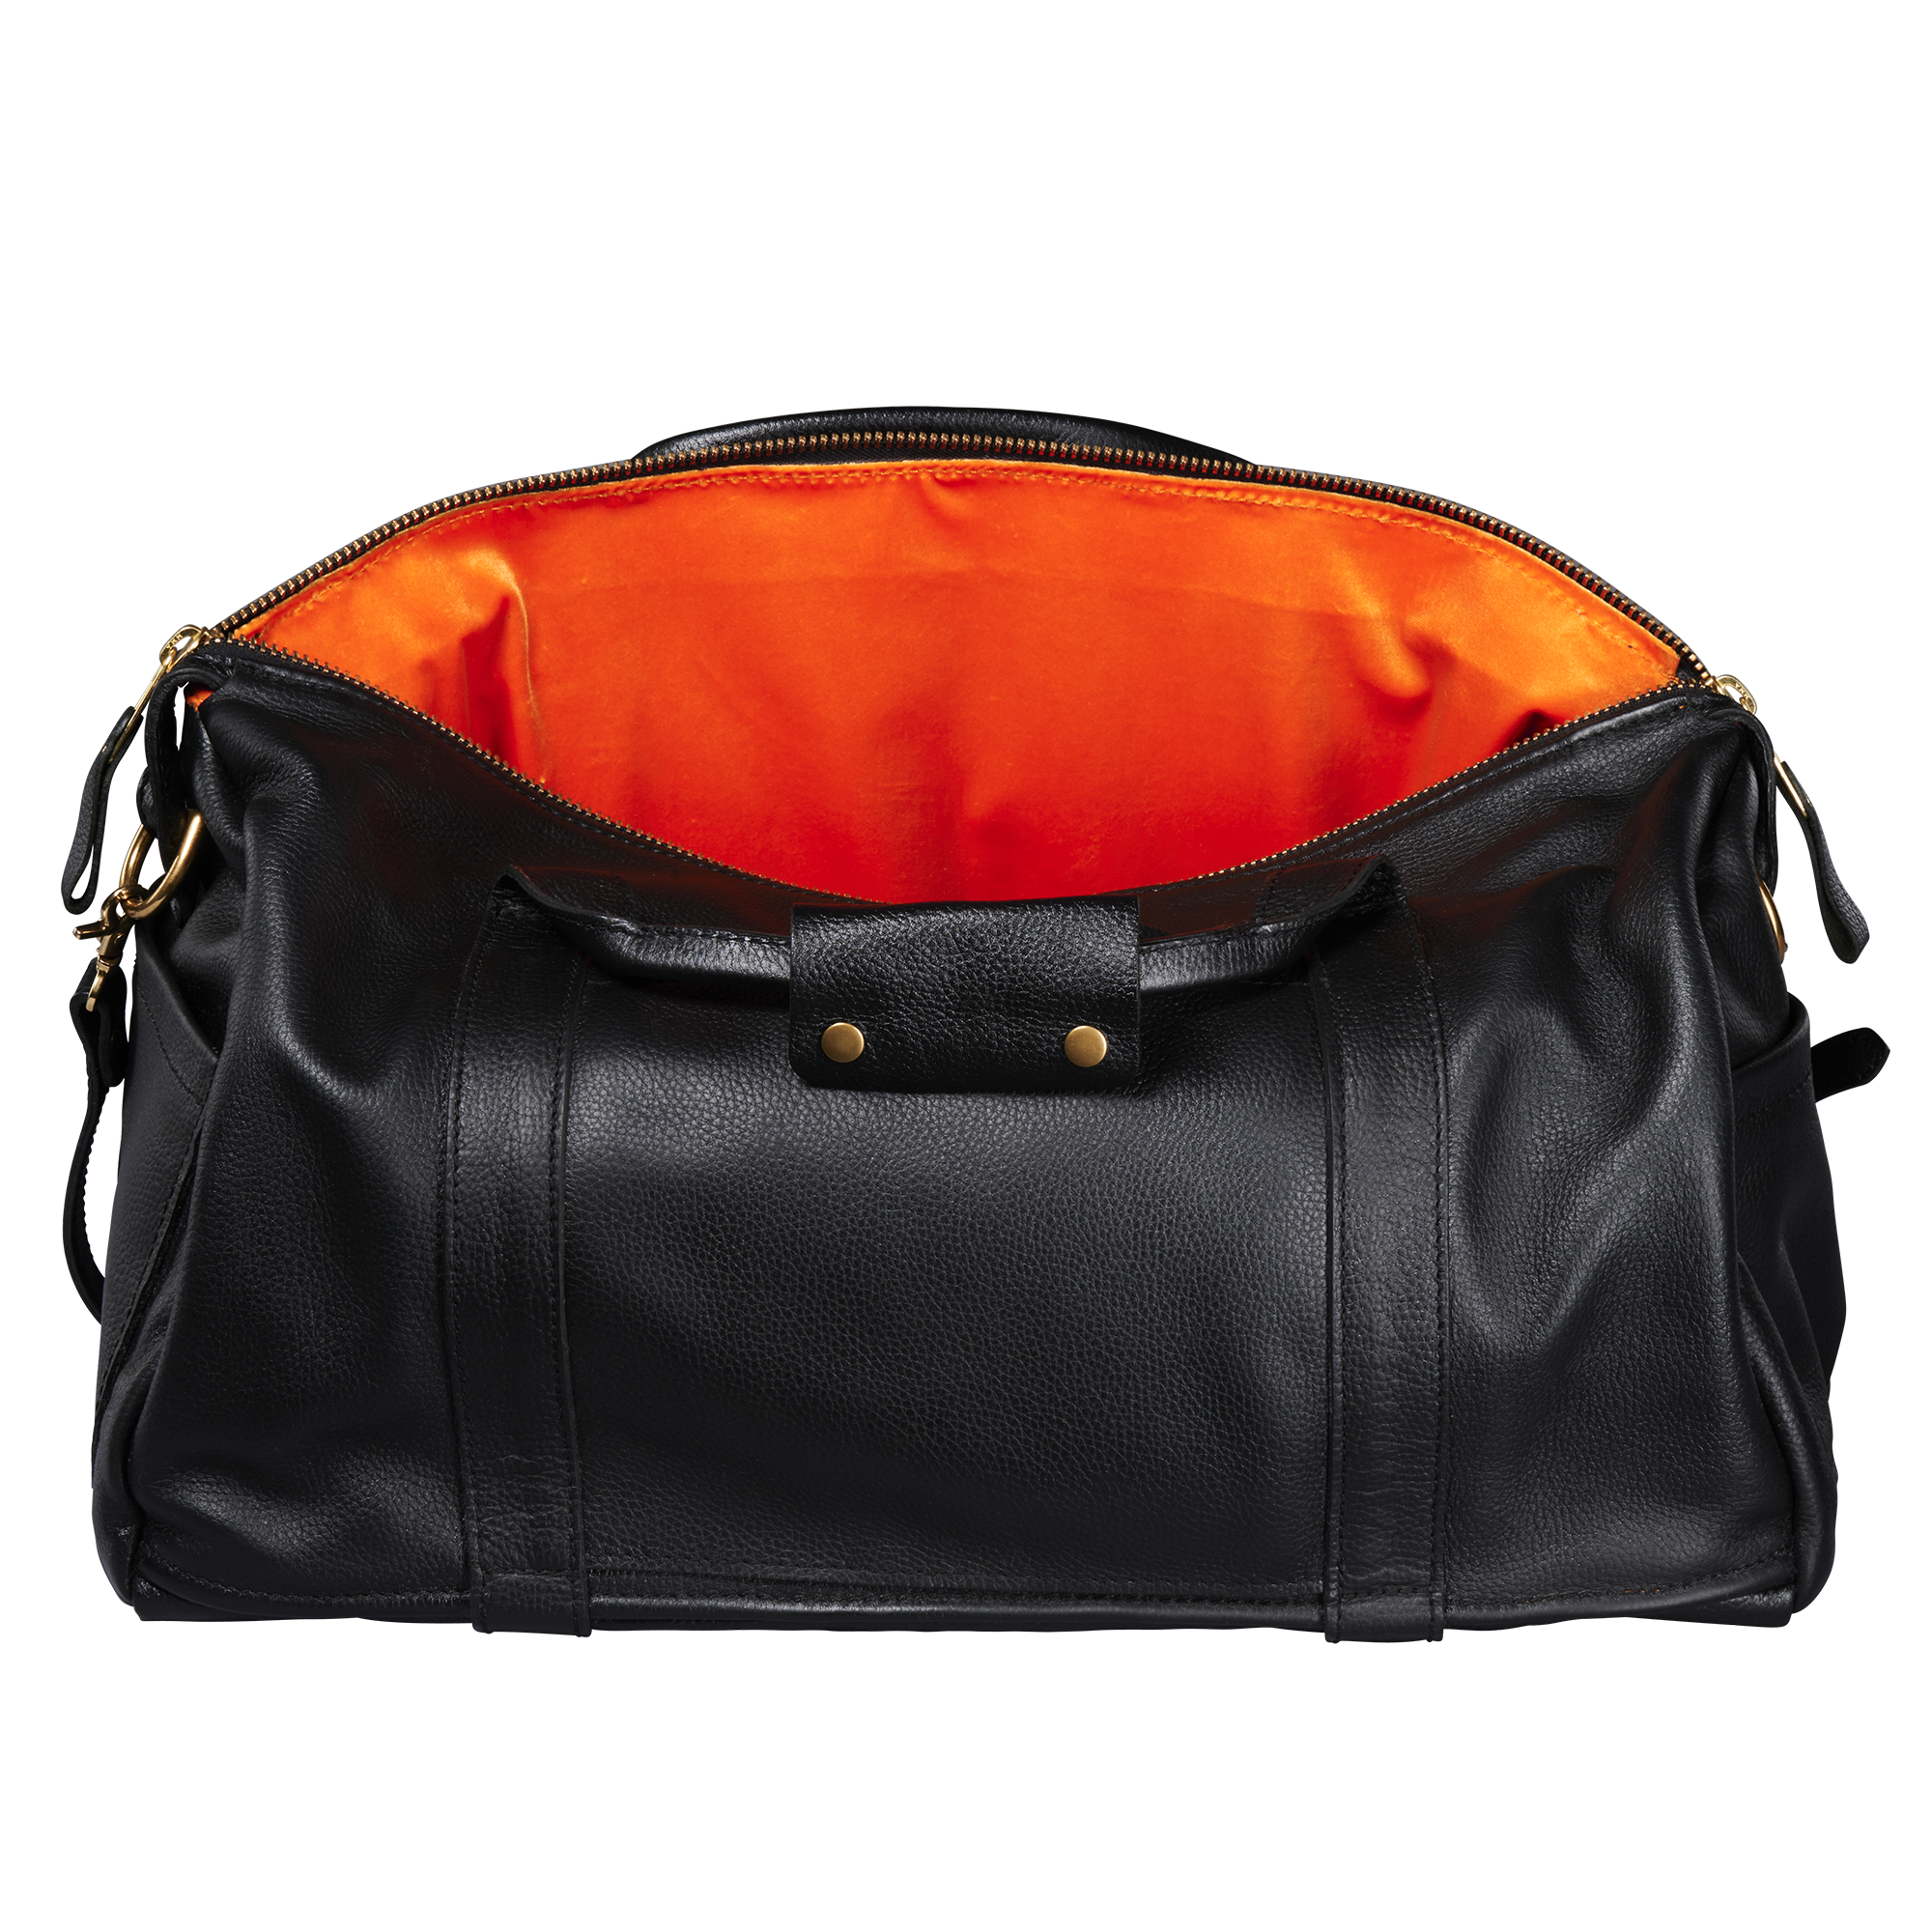 Lifton Leather Duffle Bag, Black, Exclusive - Gibson